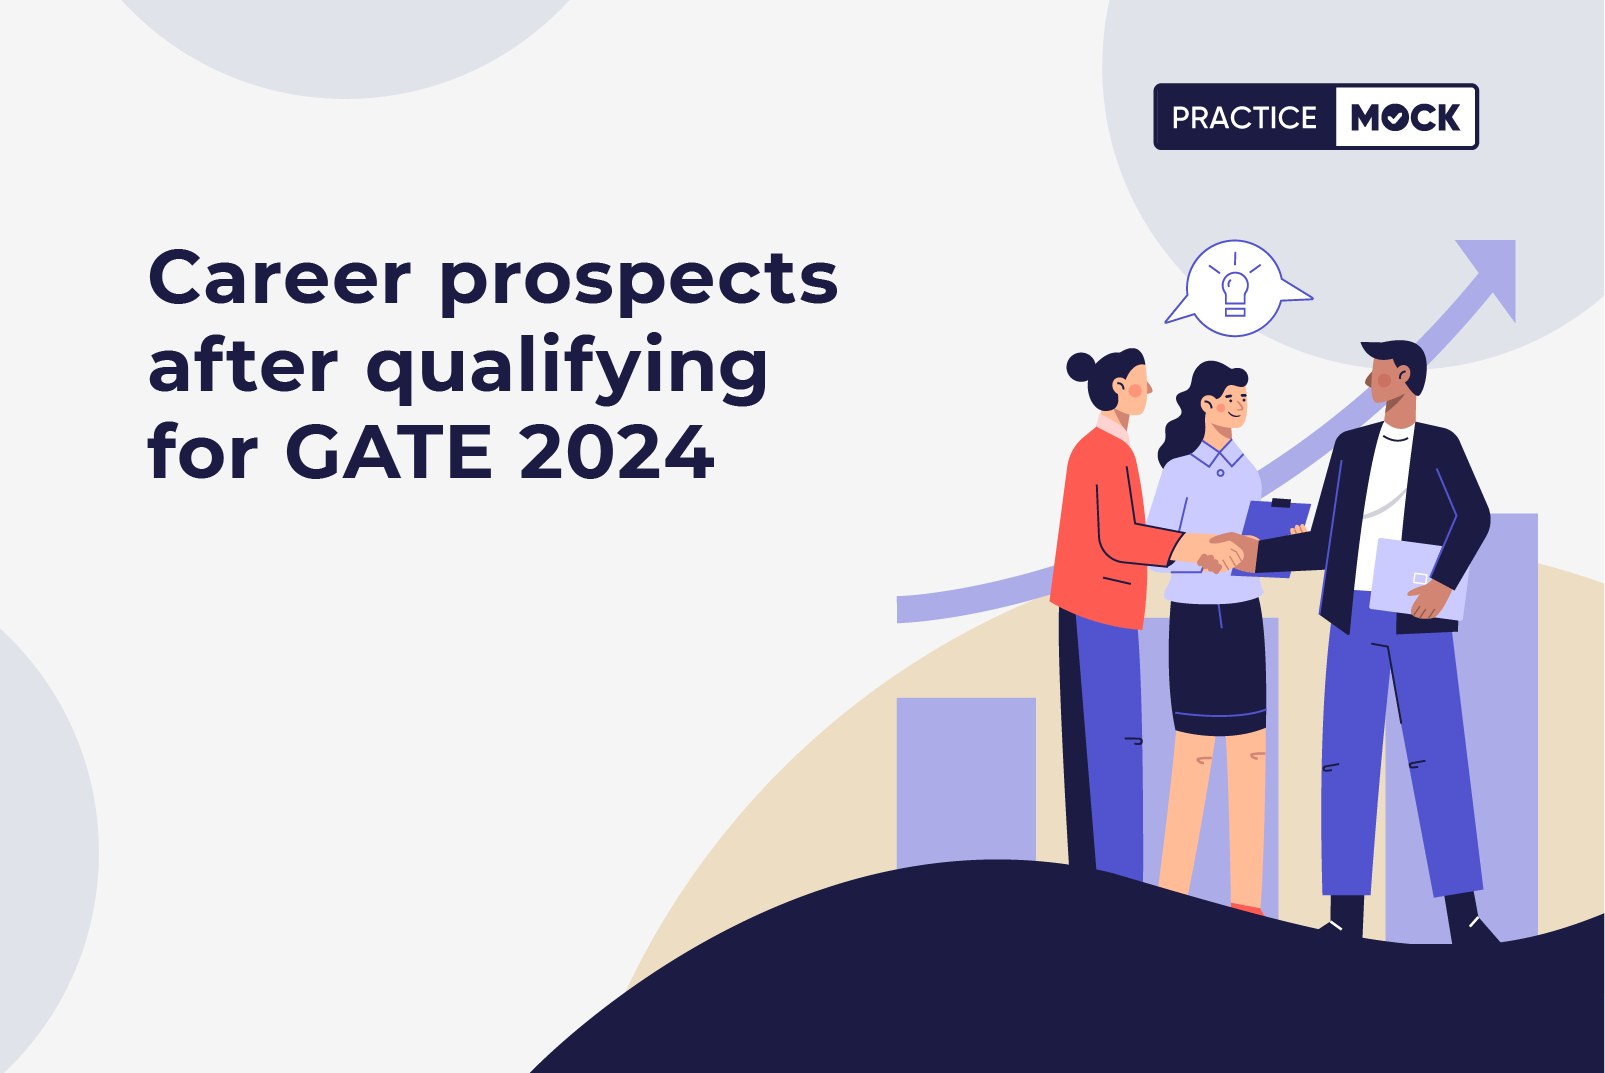 Career prospects after qualifying for GATE 2024 PracticeMock